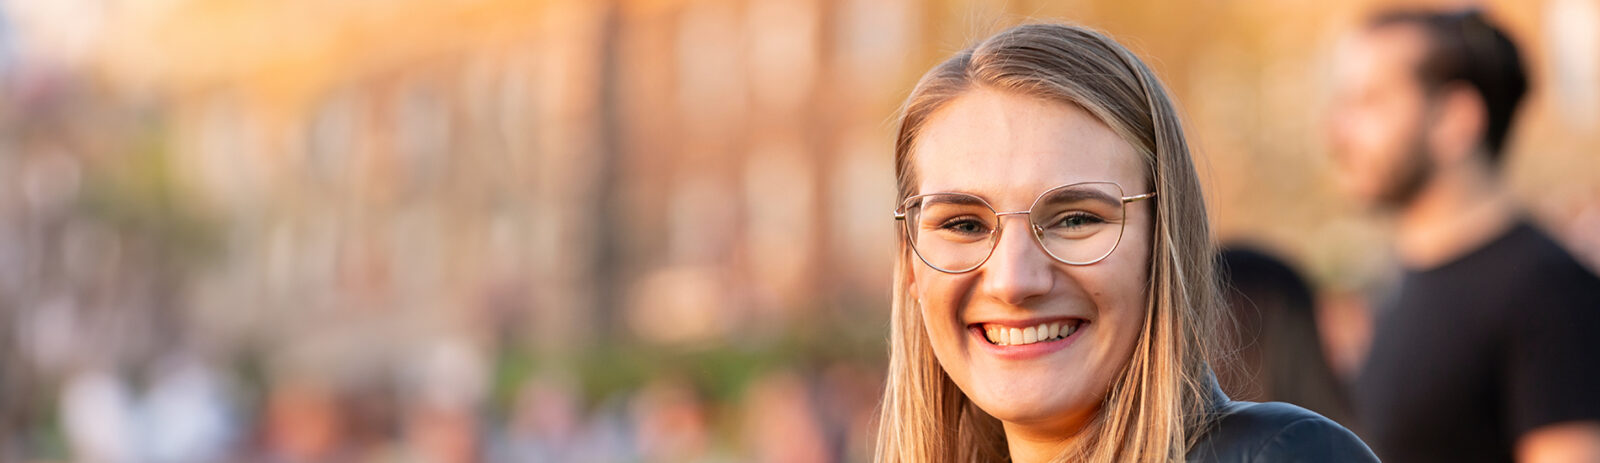 A blond woman wearing glasses smiles at the camera.